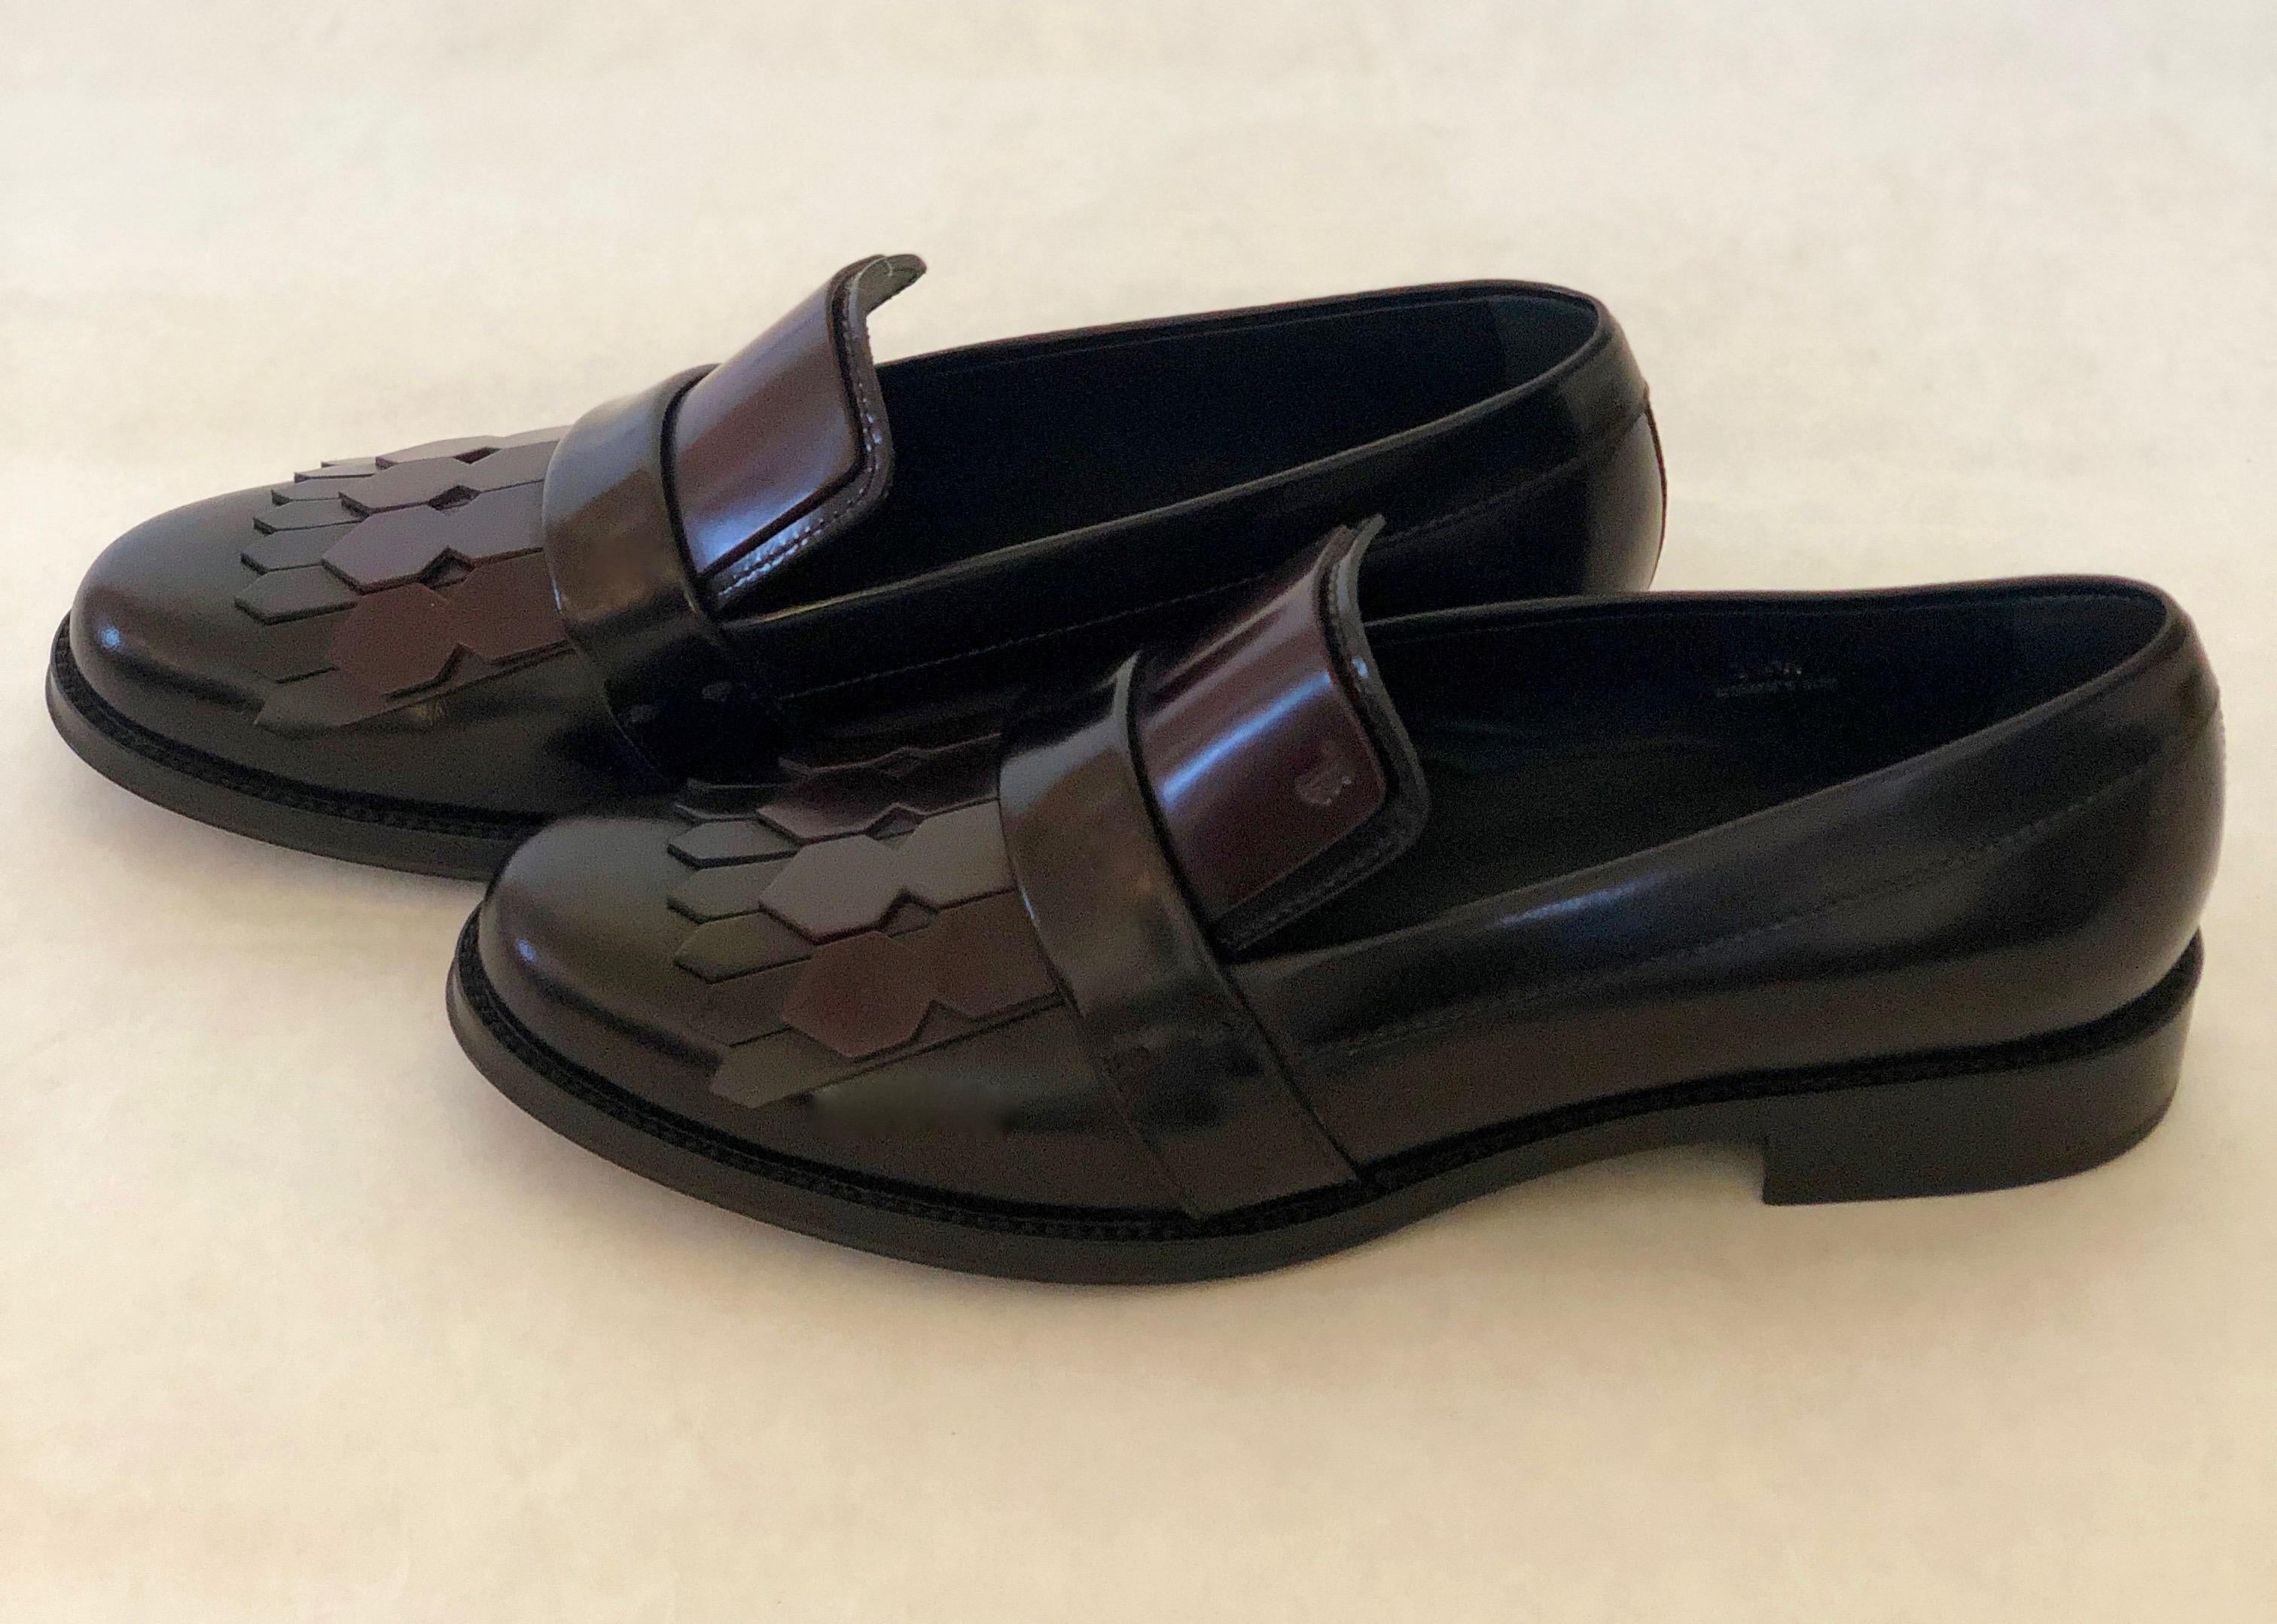 Pair of Tod's Cordovan (Burgundy) & Black Leather Kiltie Tassel Flap Loafers  For Sale 3